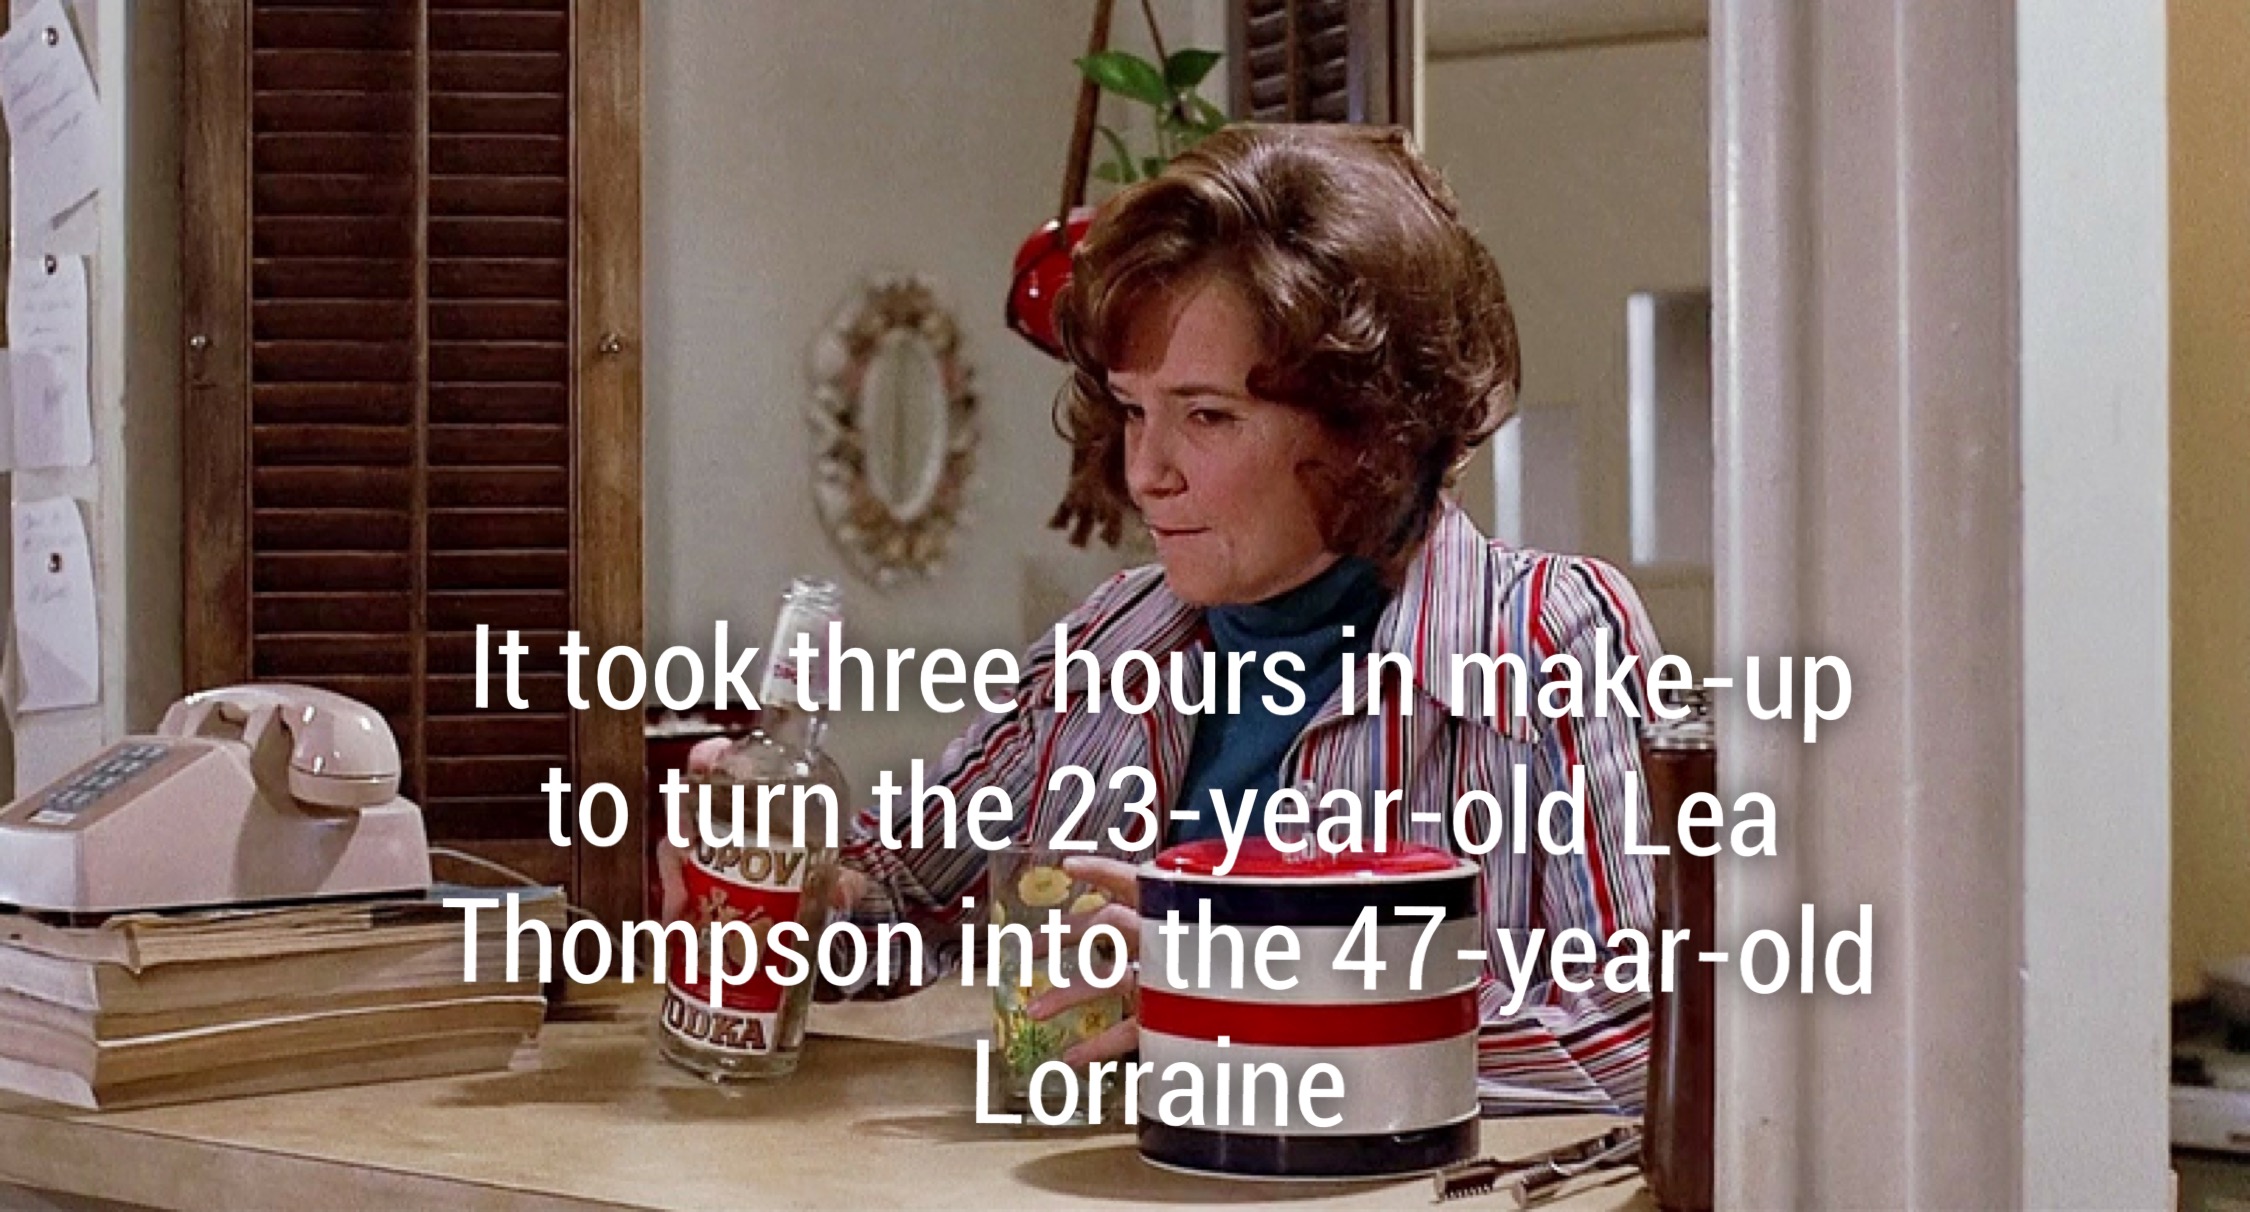 photo caption - It took three hours in makeup to turn the 23yearold Lea Thompson into the 47yearold Lorraine